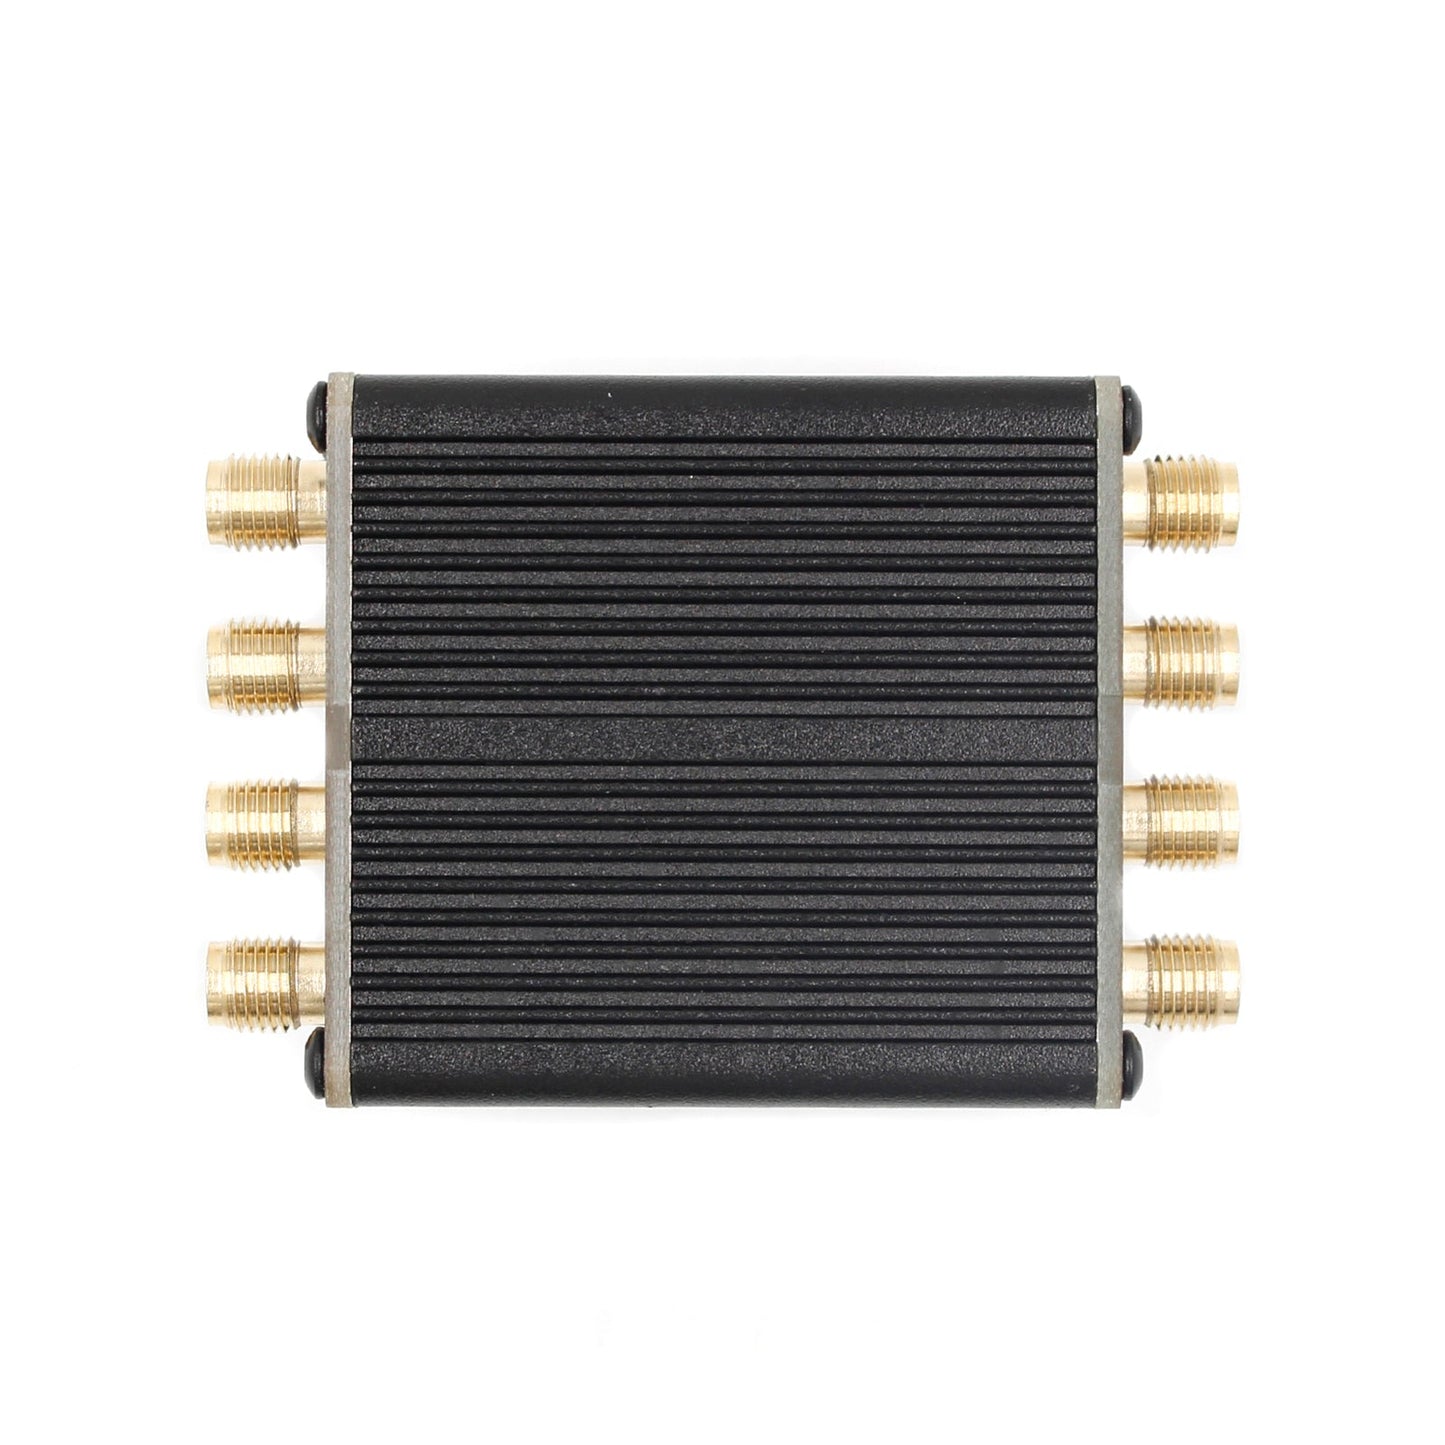 4 in 1 Filter LC filter Passive Filter Suitable For All Receivers and Radios